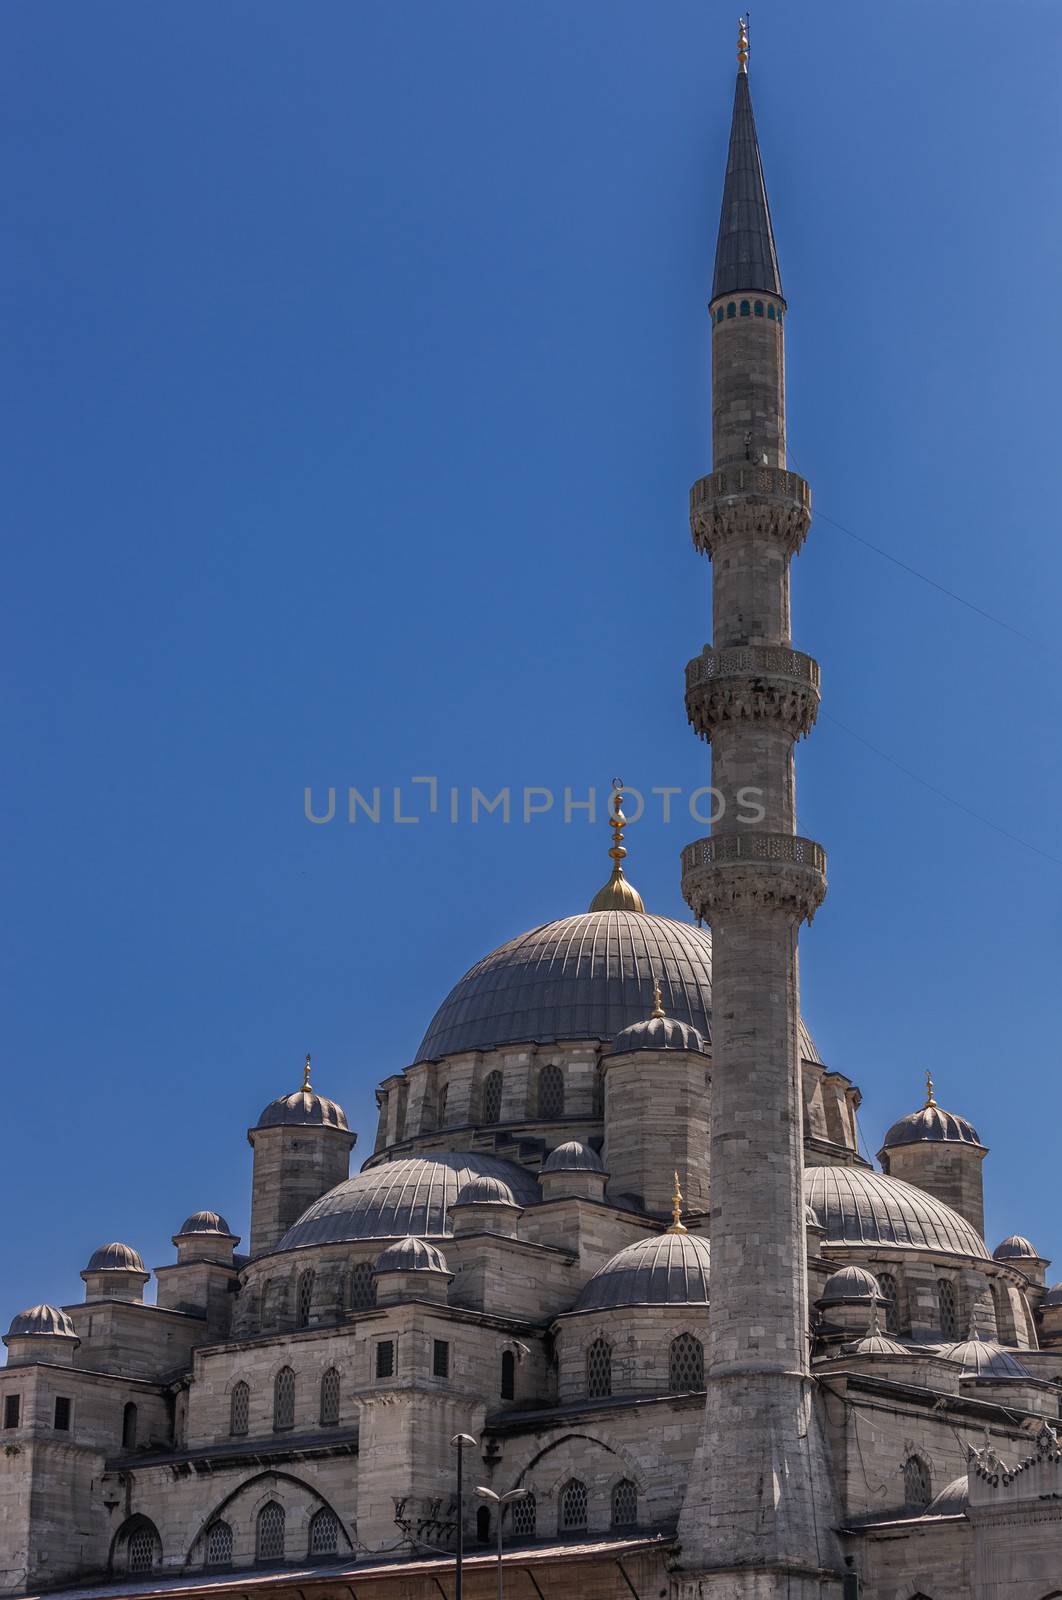 Detail of the Blue Mosque with Minaret